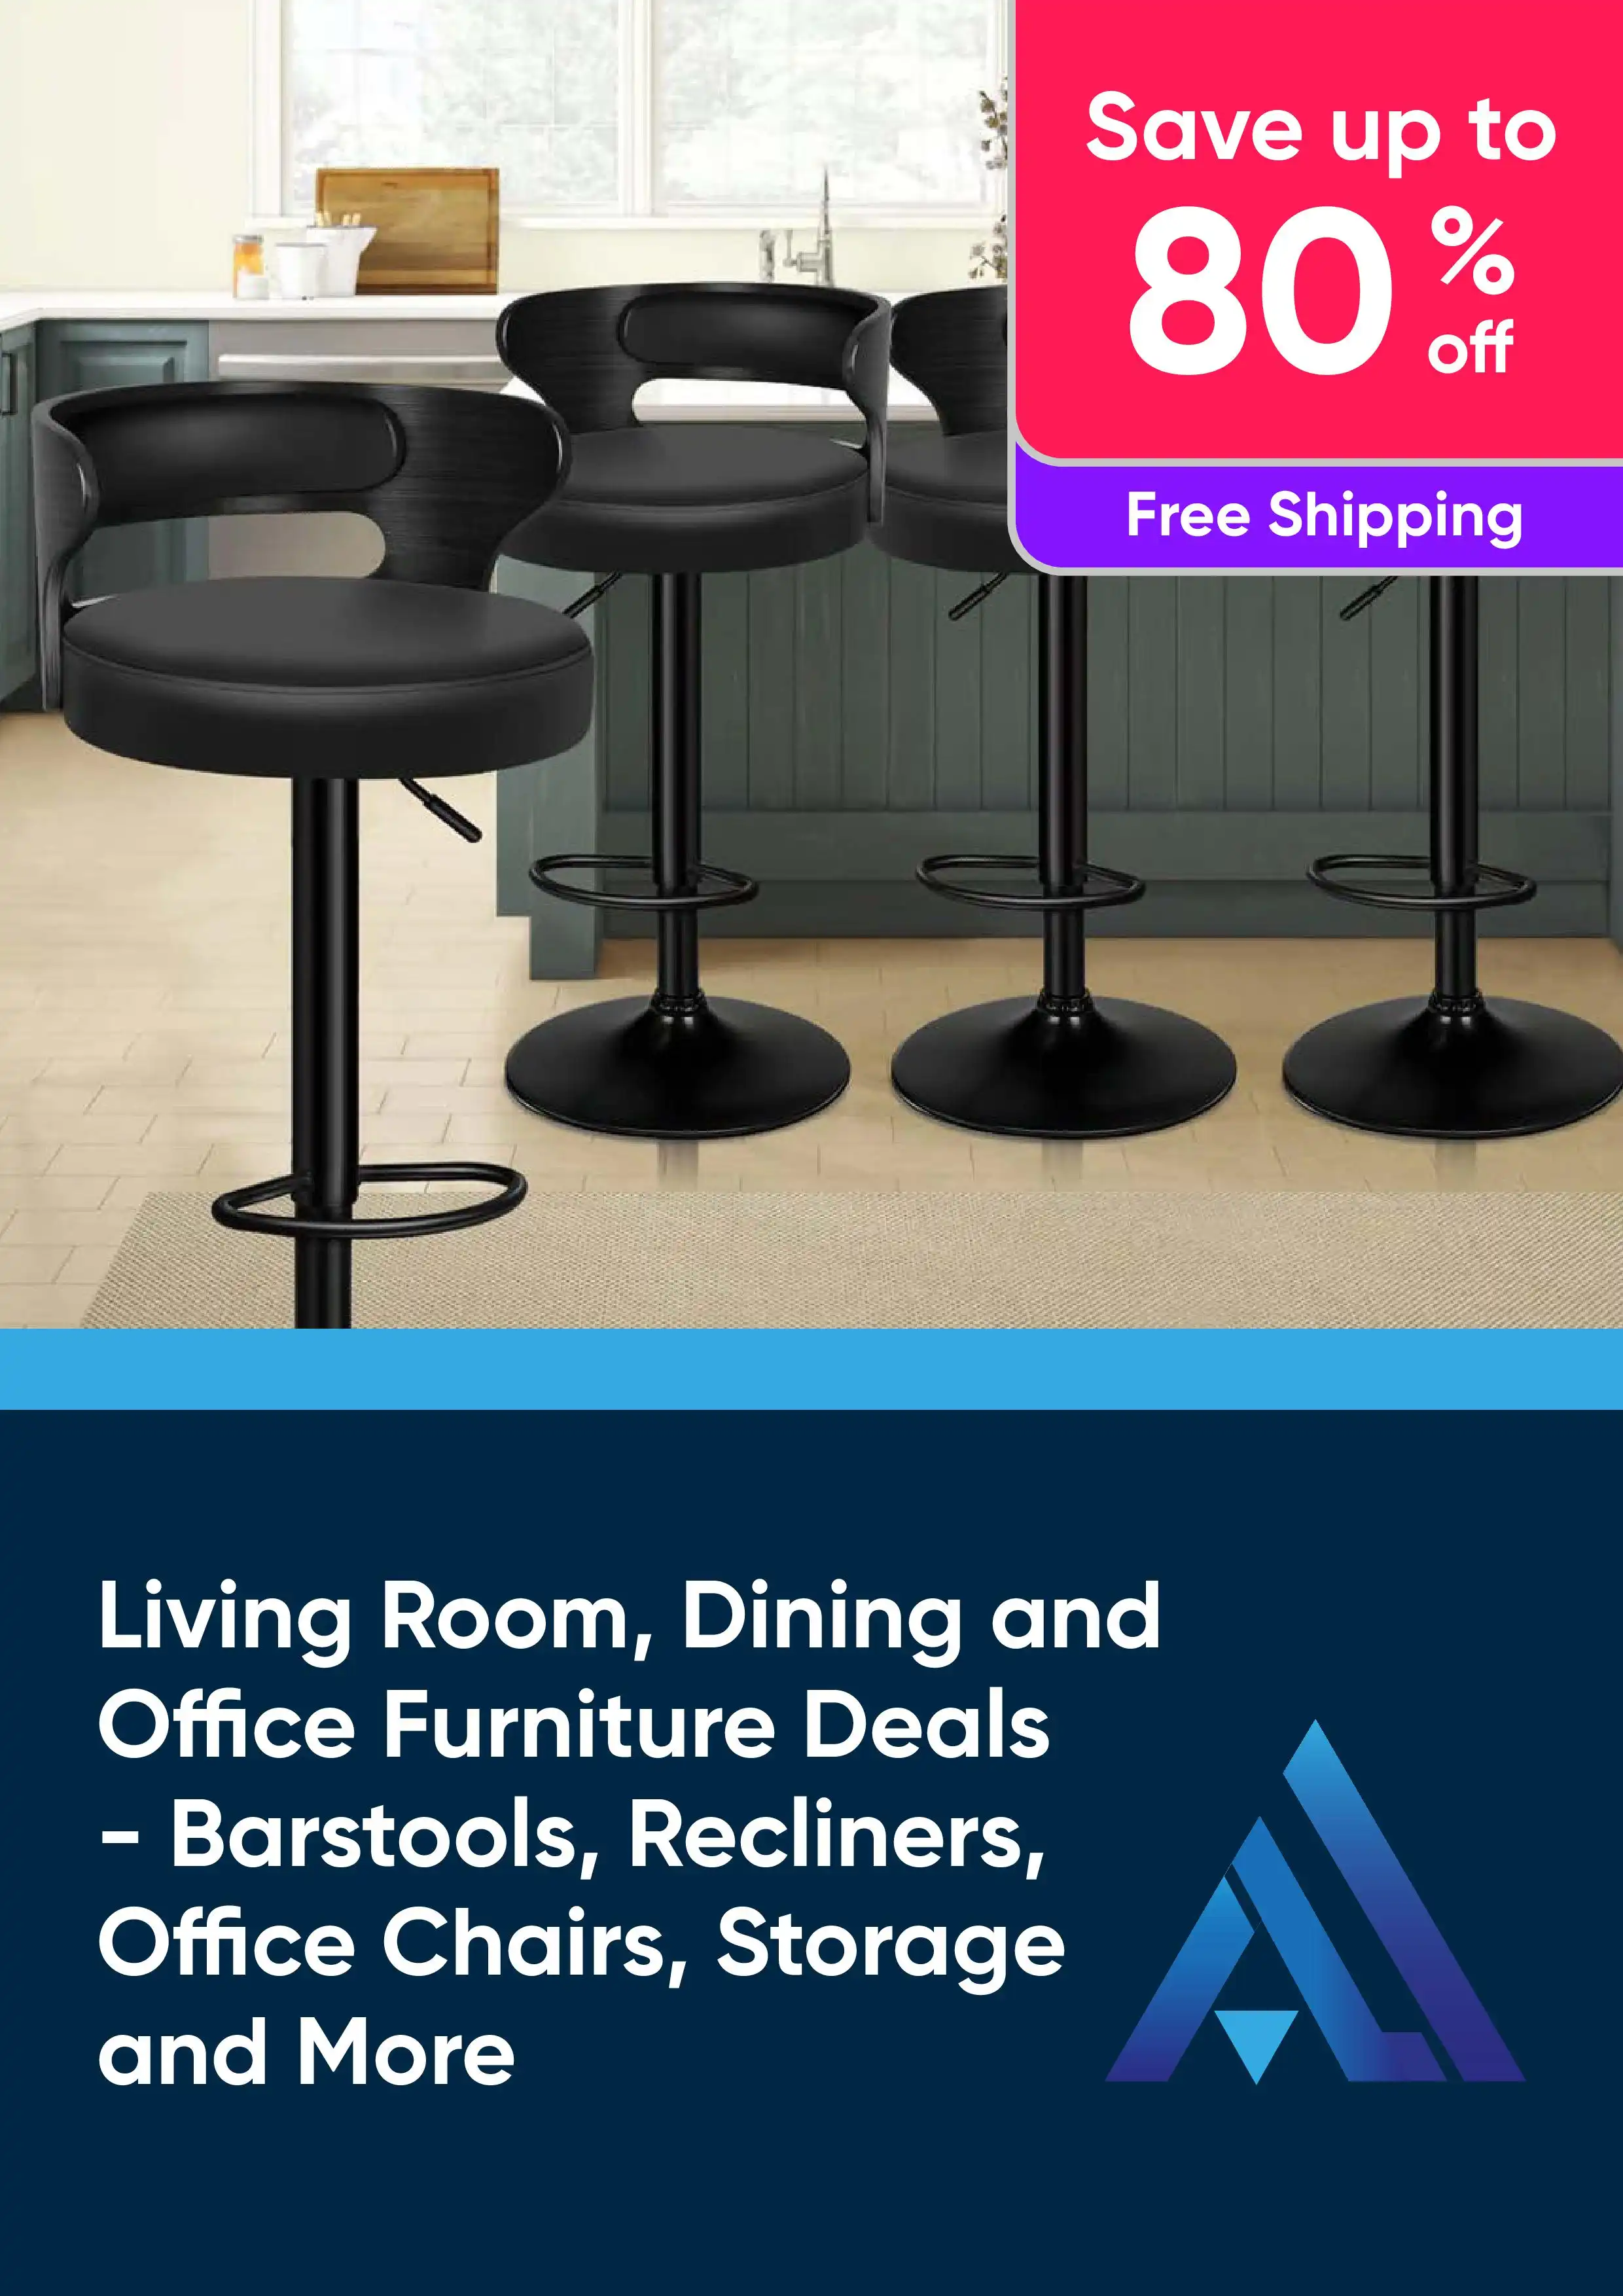 Living Room, Dining and Office Furniture Deals - Save Up to 80% Off Barstools, Recliners and More